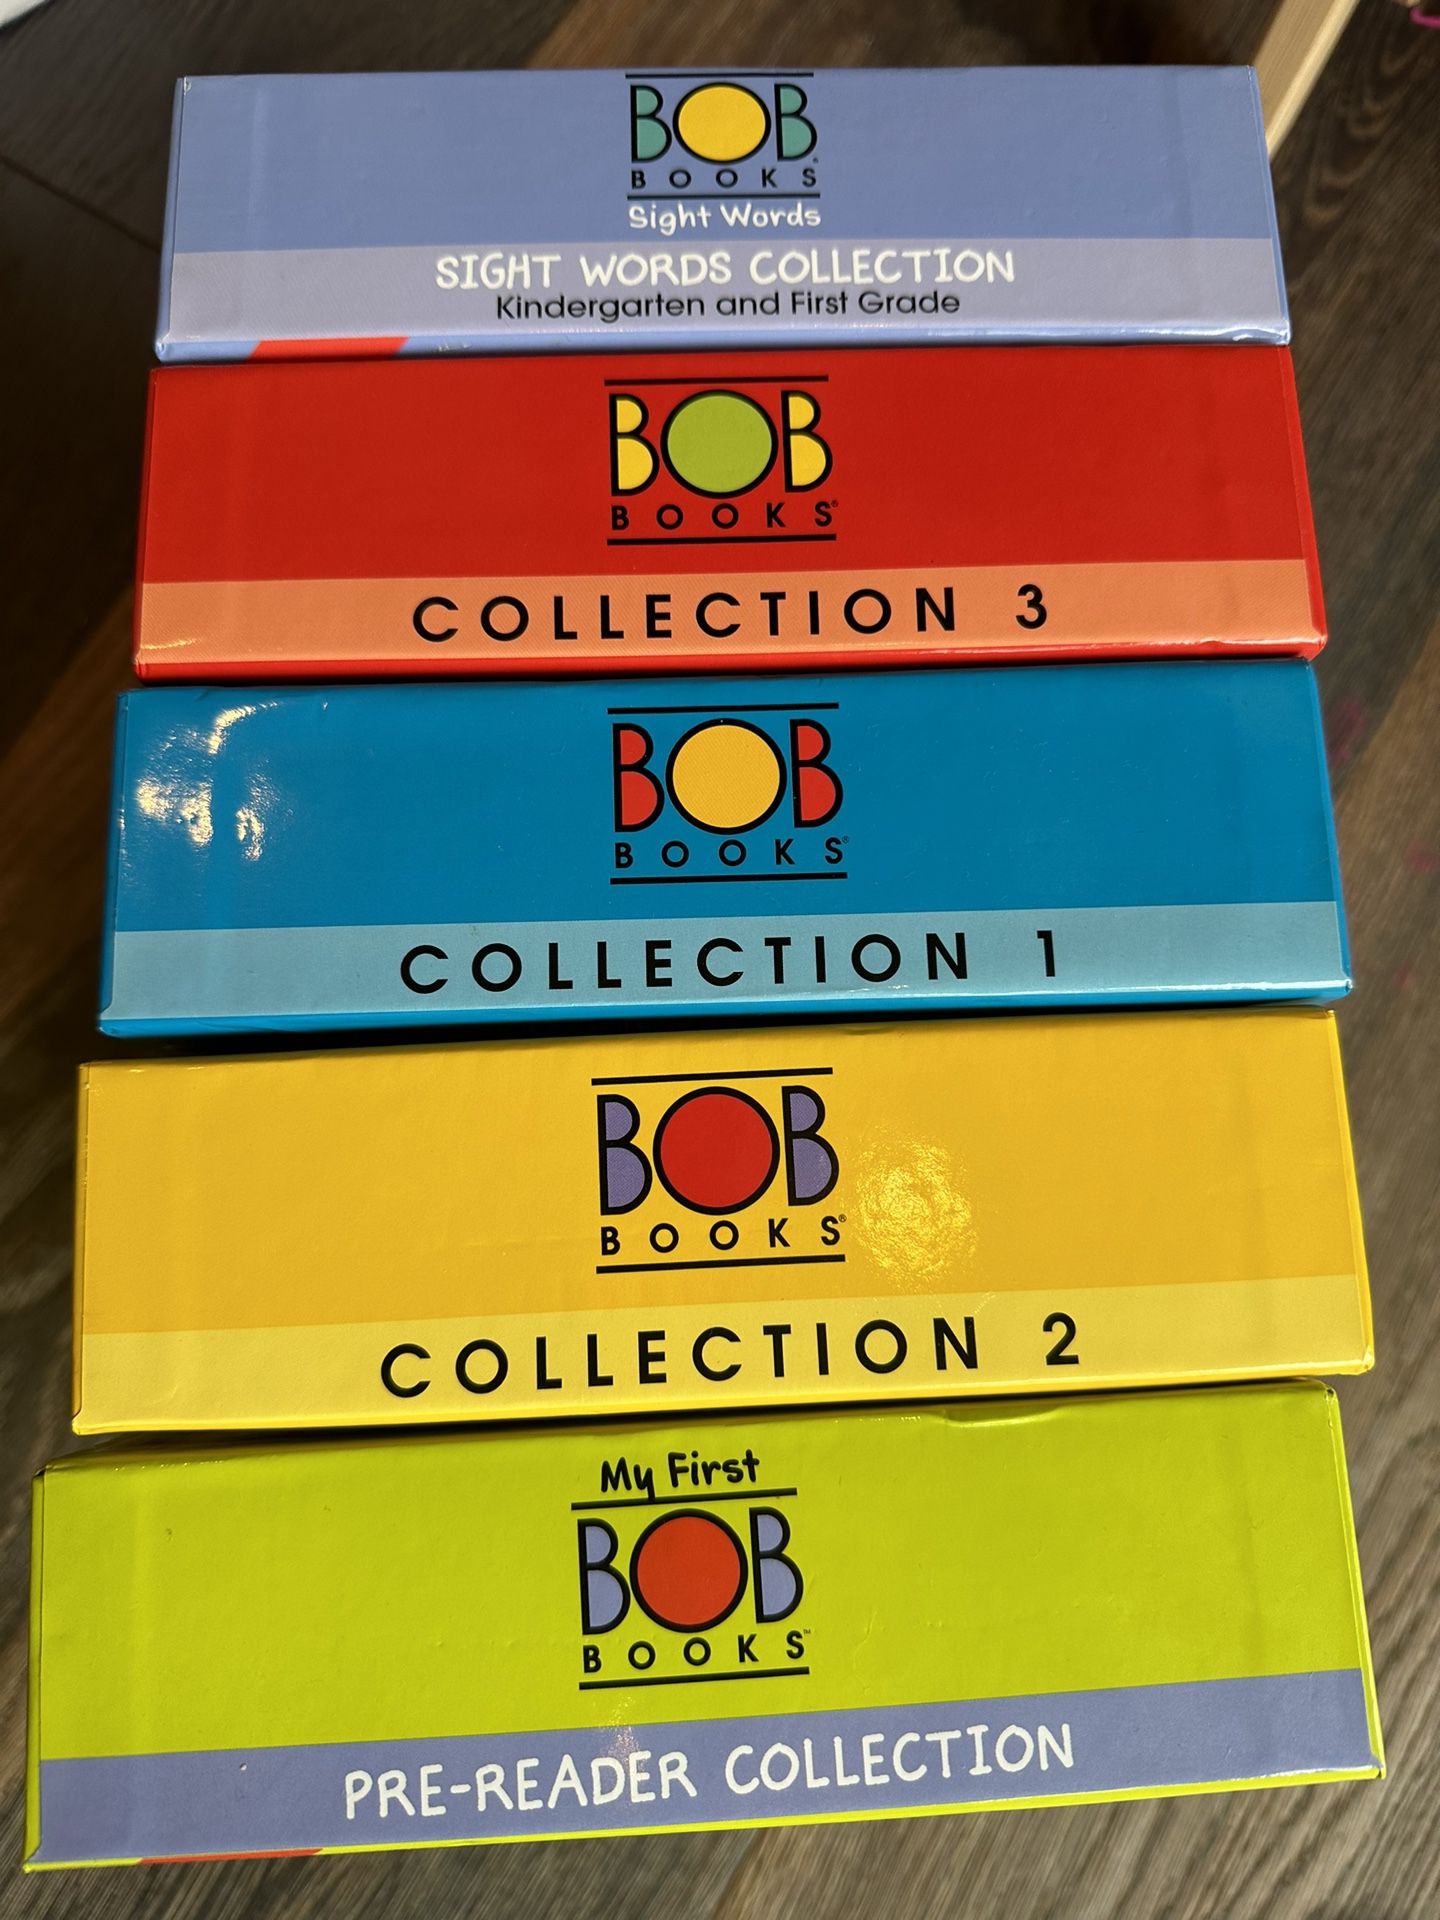 BOB Books All Collection Box Set (Collection 1, Collection 2, Collection 3, My First Pre-Reader, Sight Words, Collection 6)